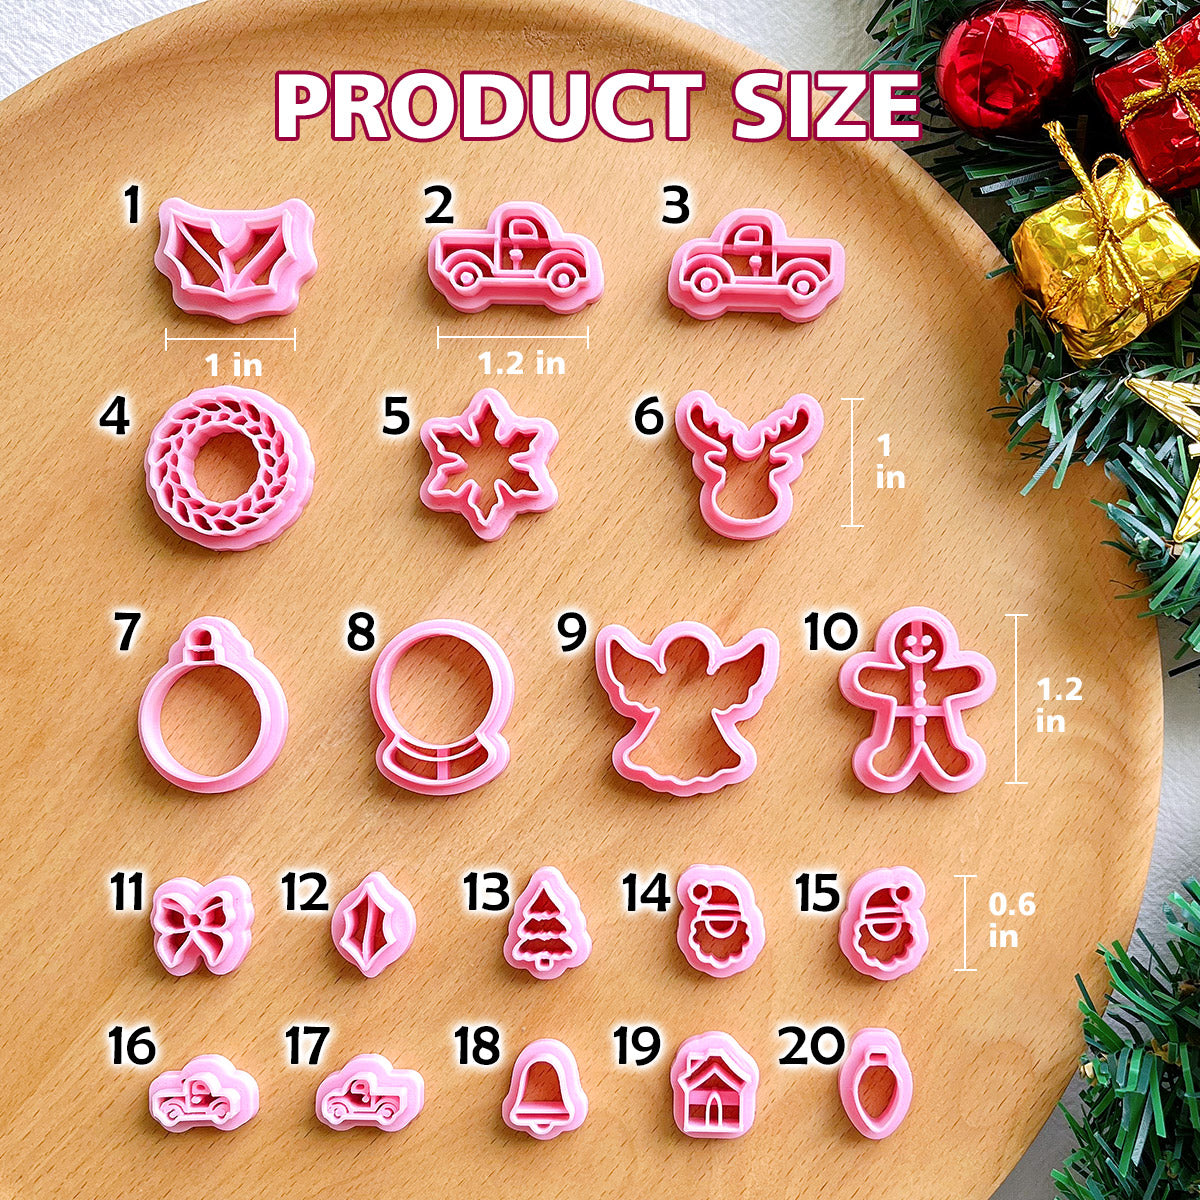 KEOKER Christmas Polymer Clay Cutters (20 Shapes)